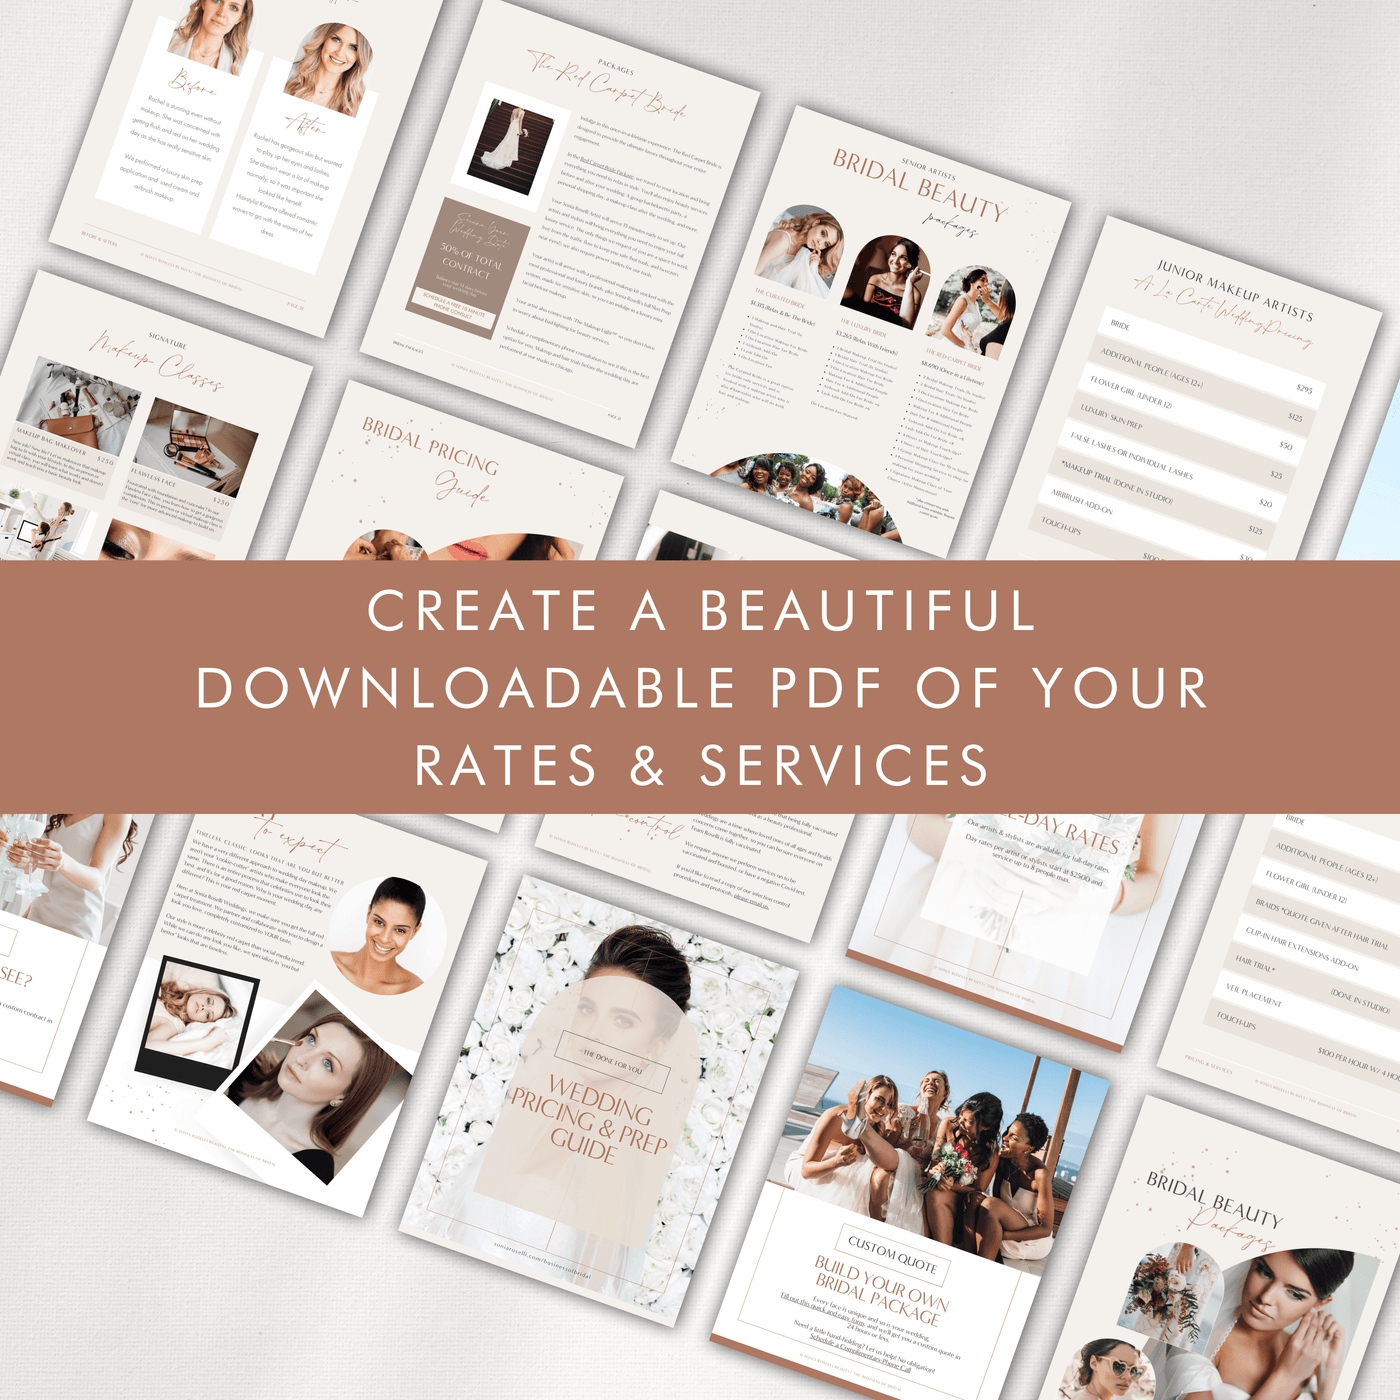 Create a beautiful downloadable PDF of your rates & services 